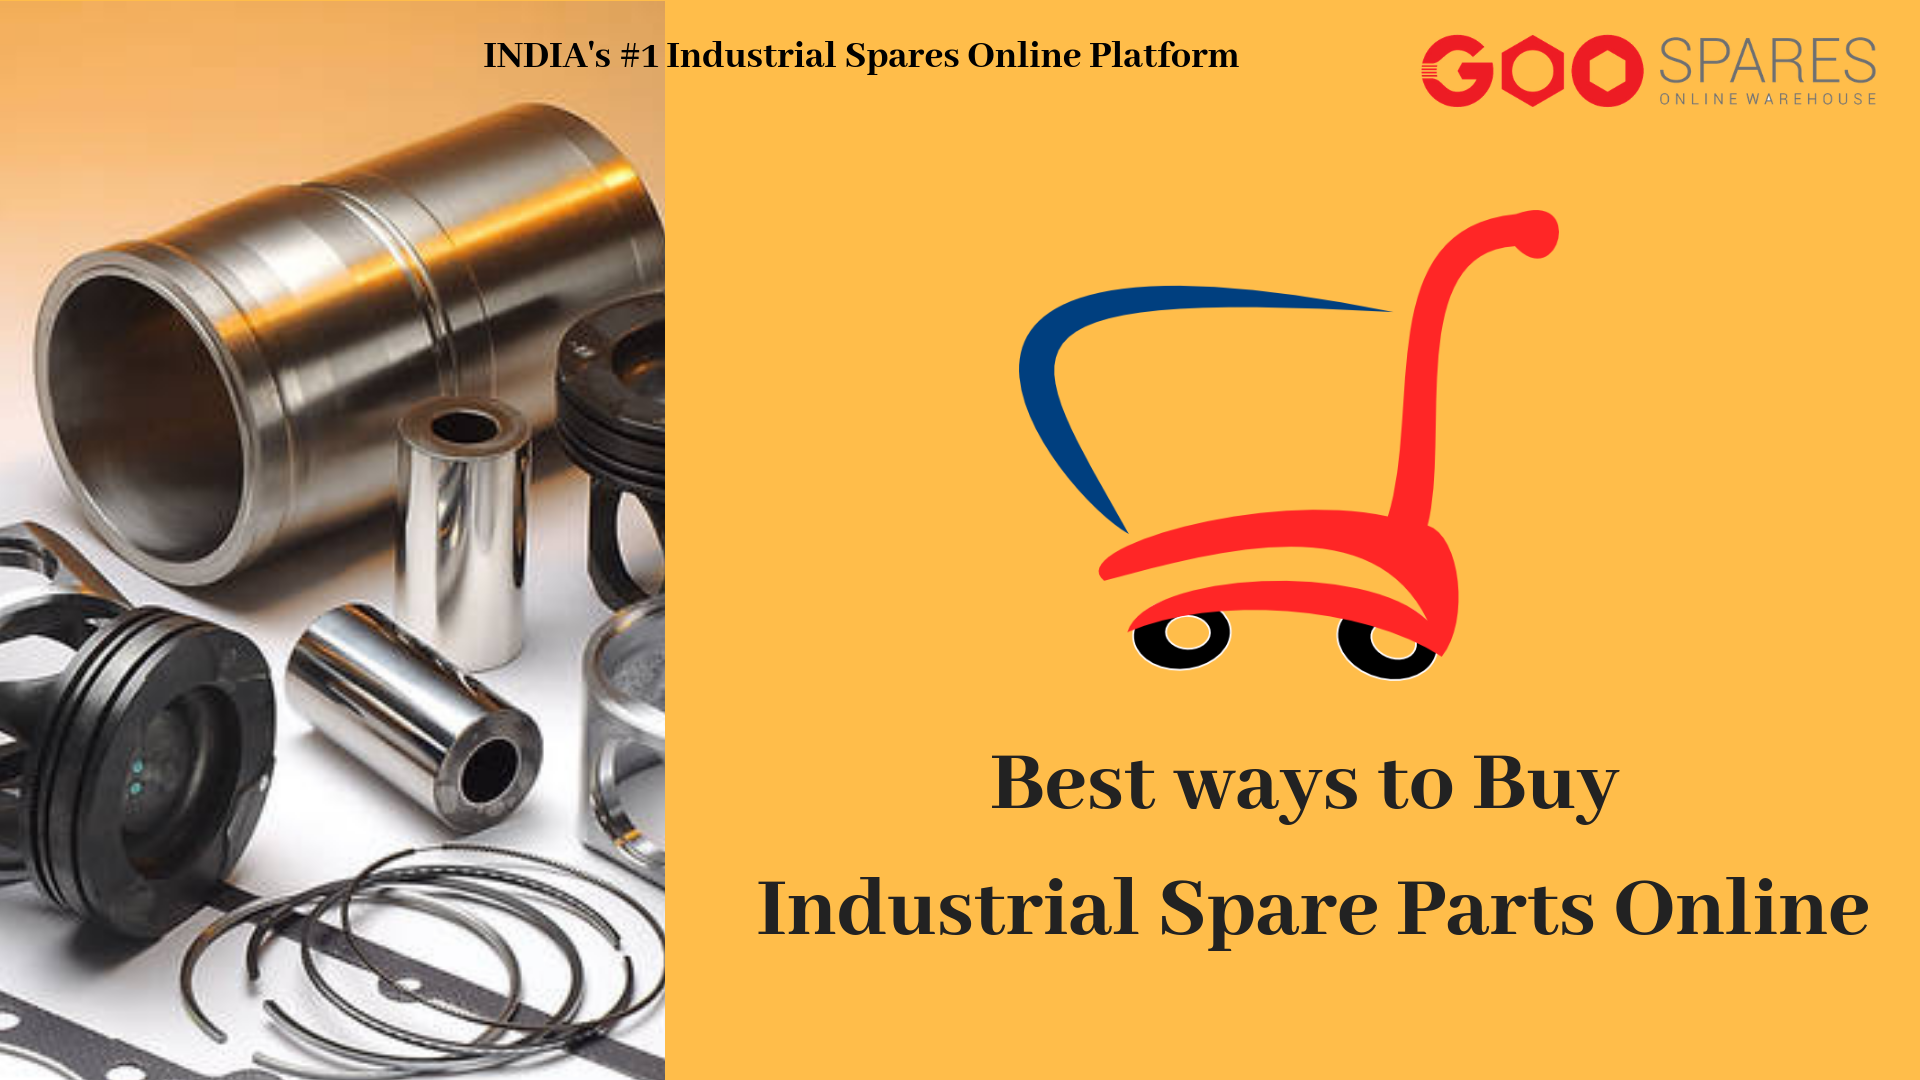 Best ways to buy Industrial Spare Parts